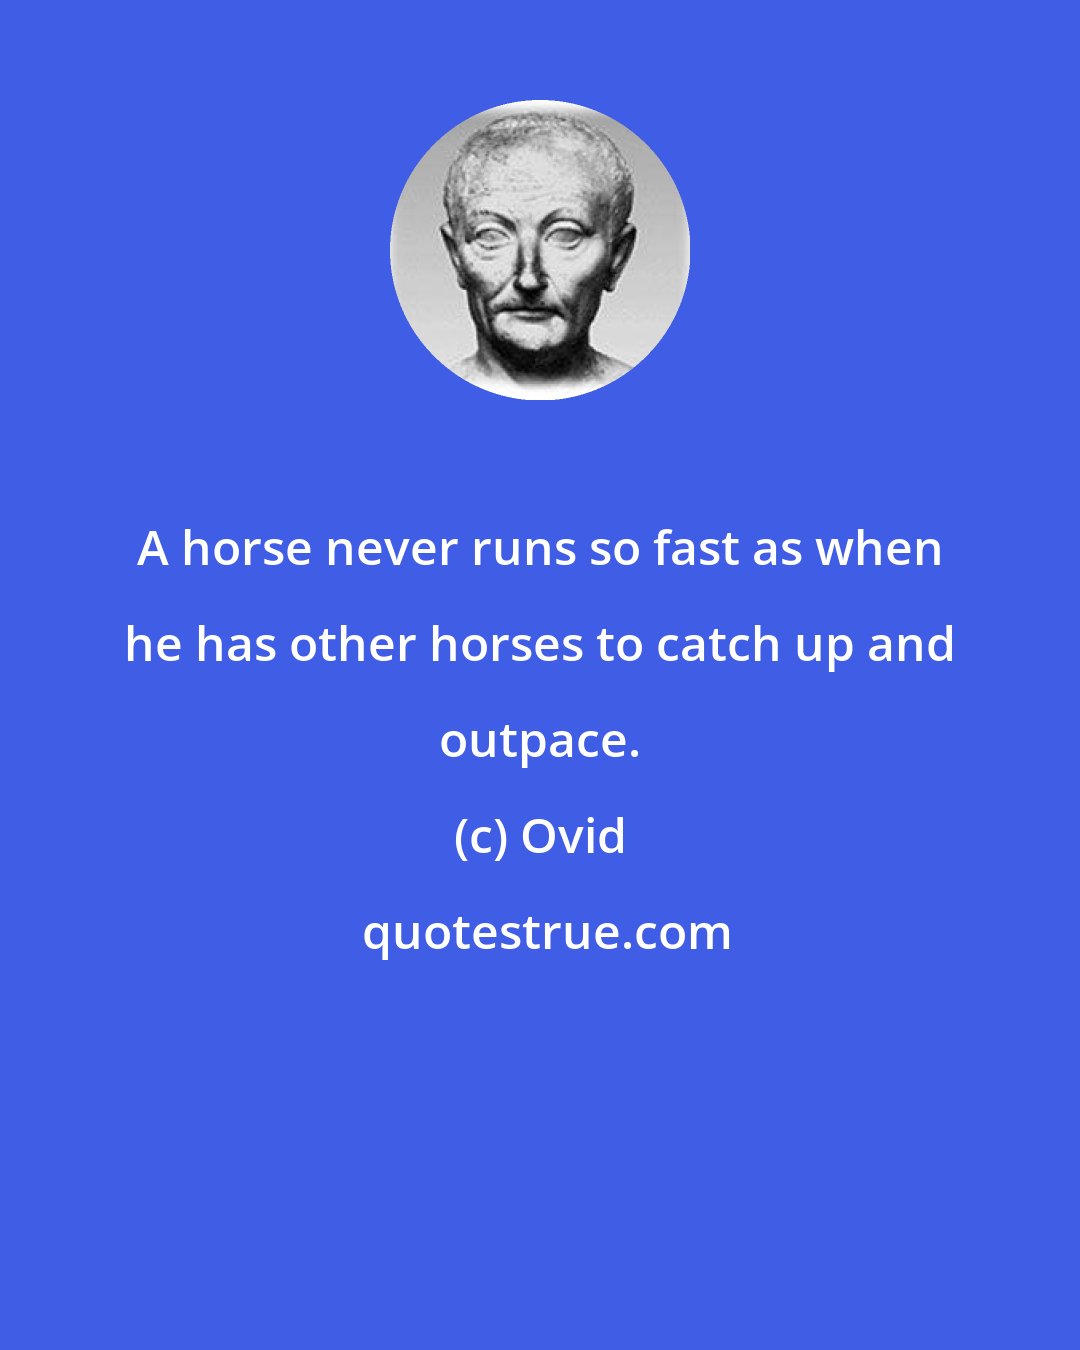 Ovid: A horse never runs so fast as when he has other horses to catch up and outpace.